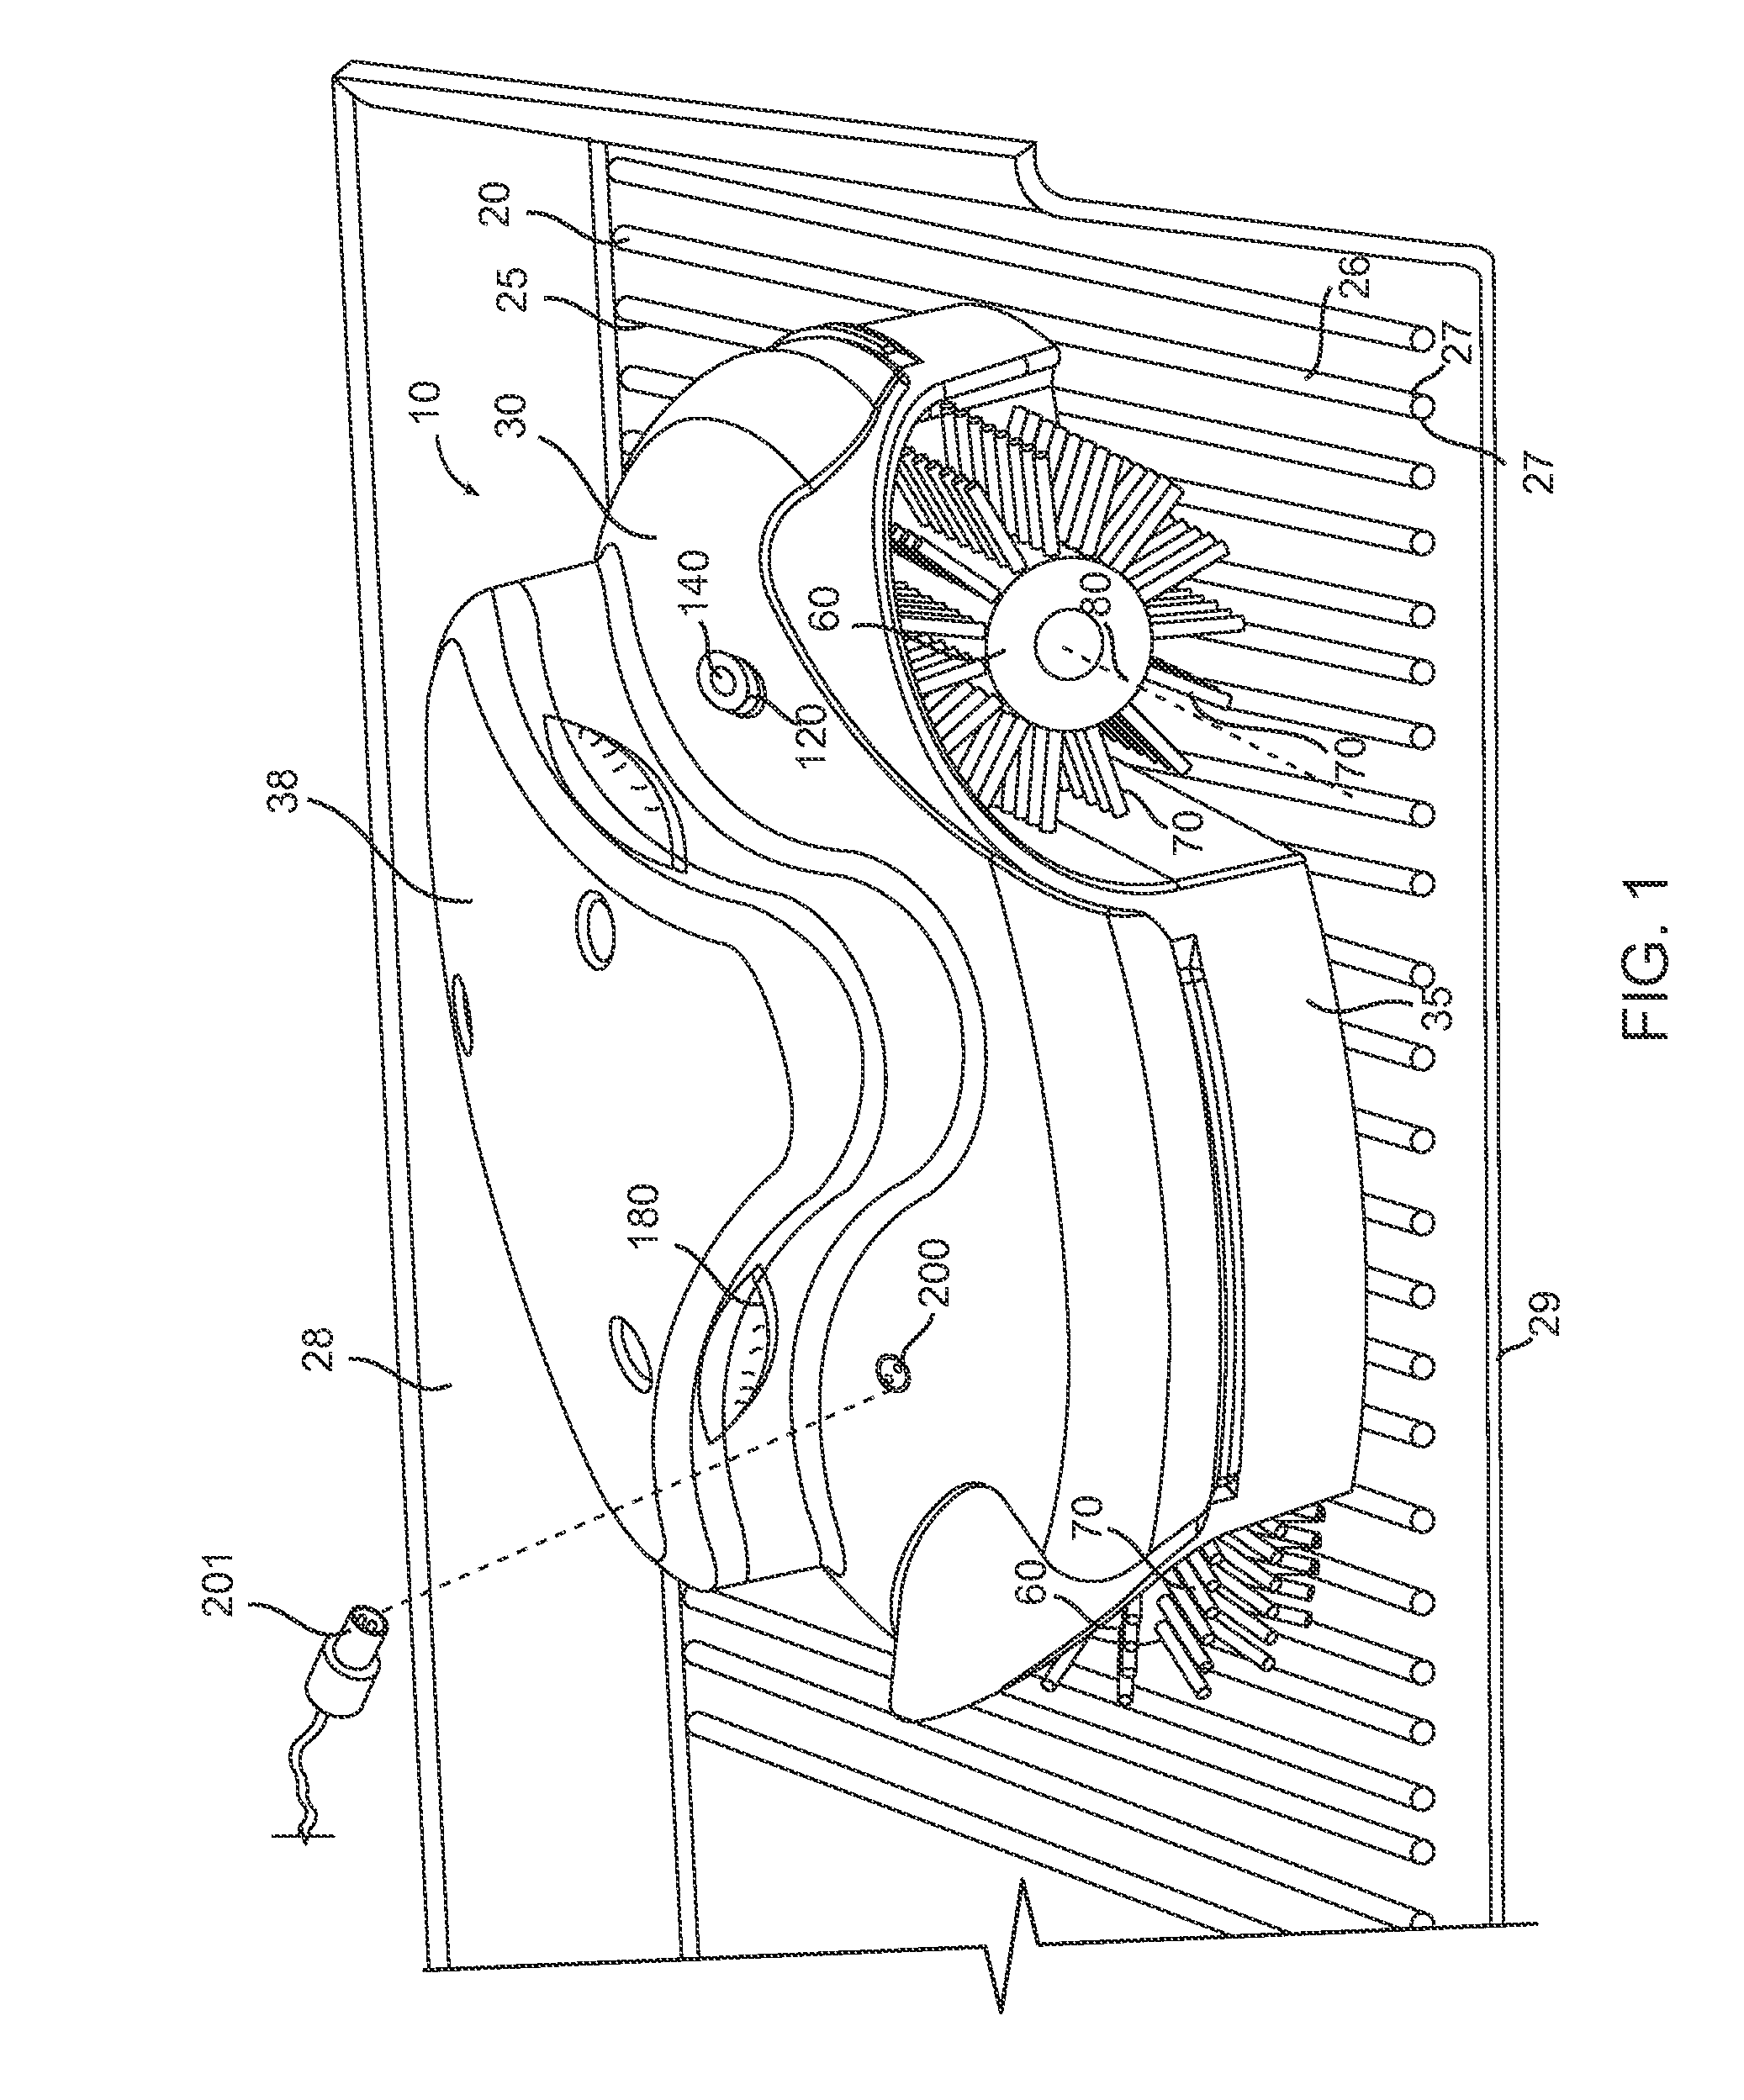 Surface-cleaning device